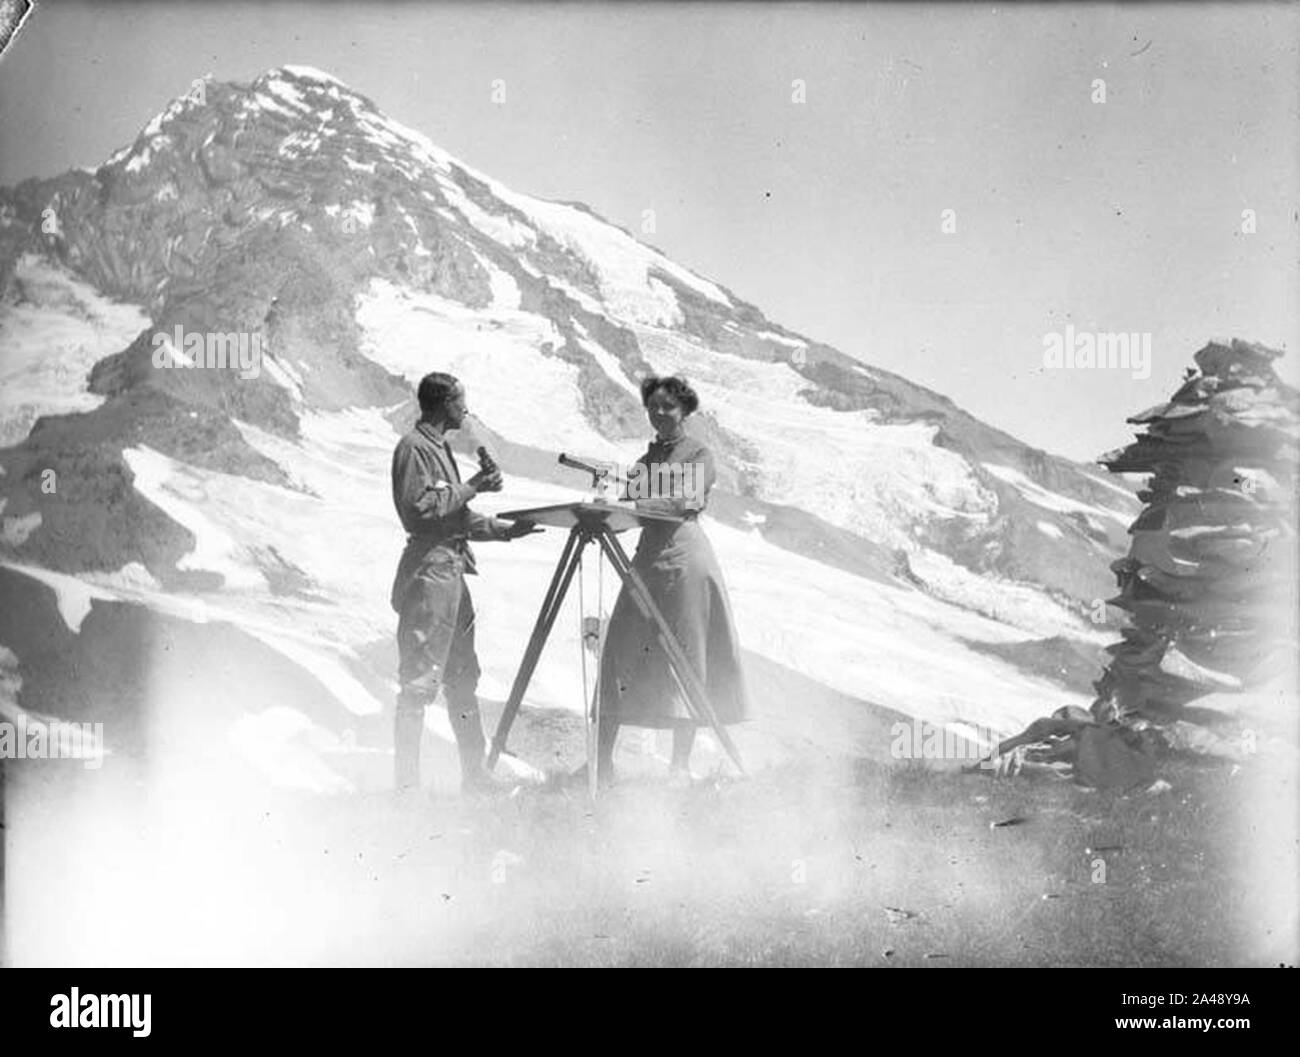 FE Matthes with Edith Matthes and ER Lehndorff on Pyramid Peak Mt Rainier August 1911 (WASTATE 2314). Stock Photo